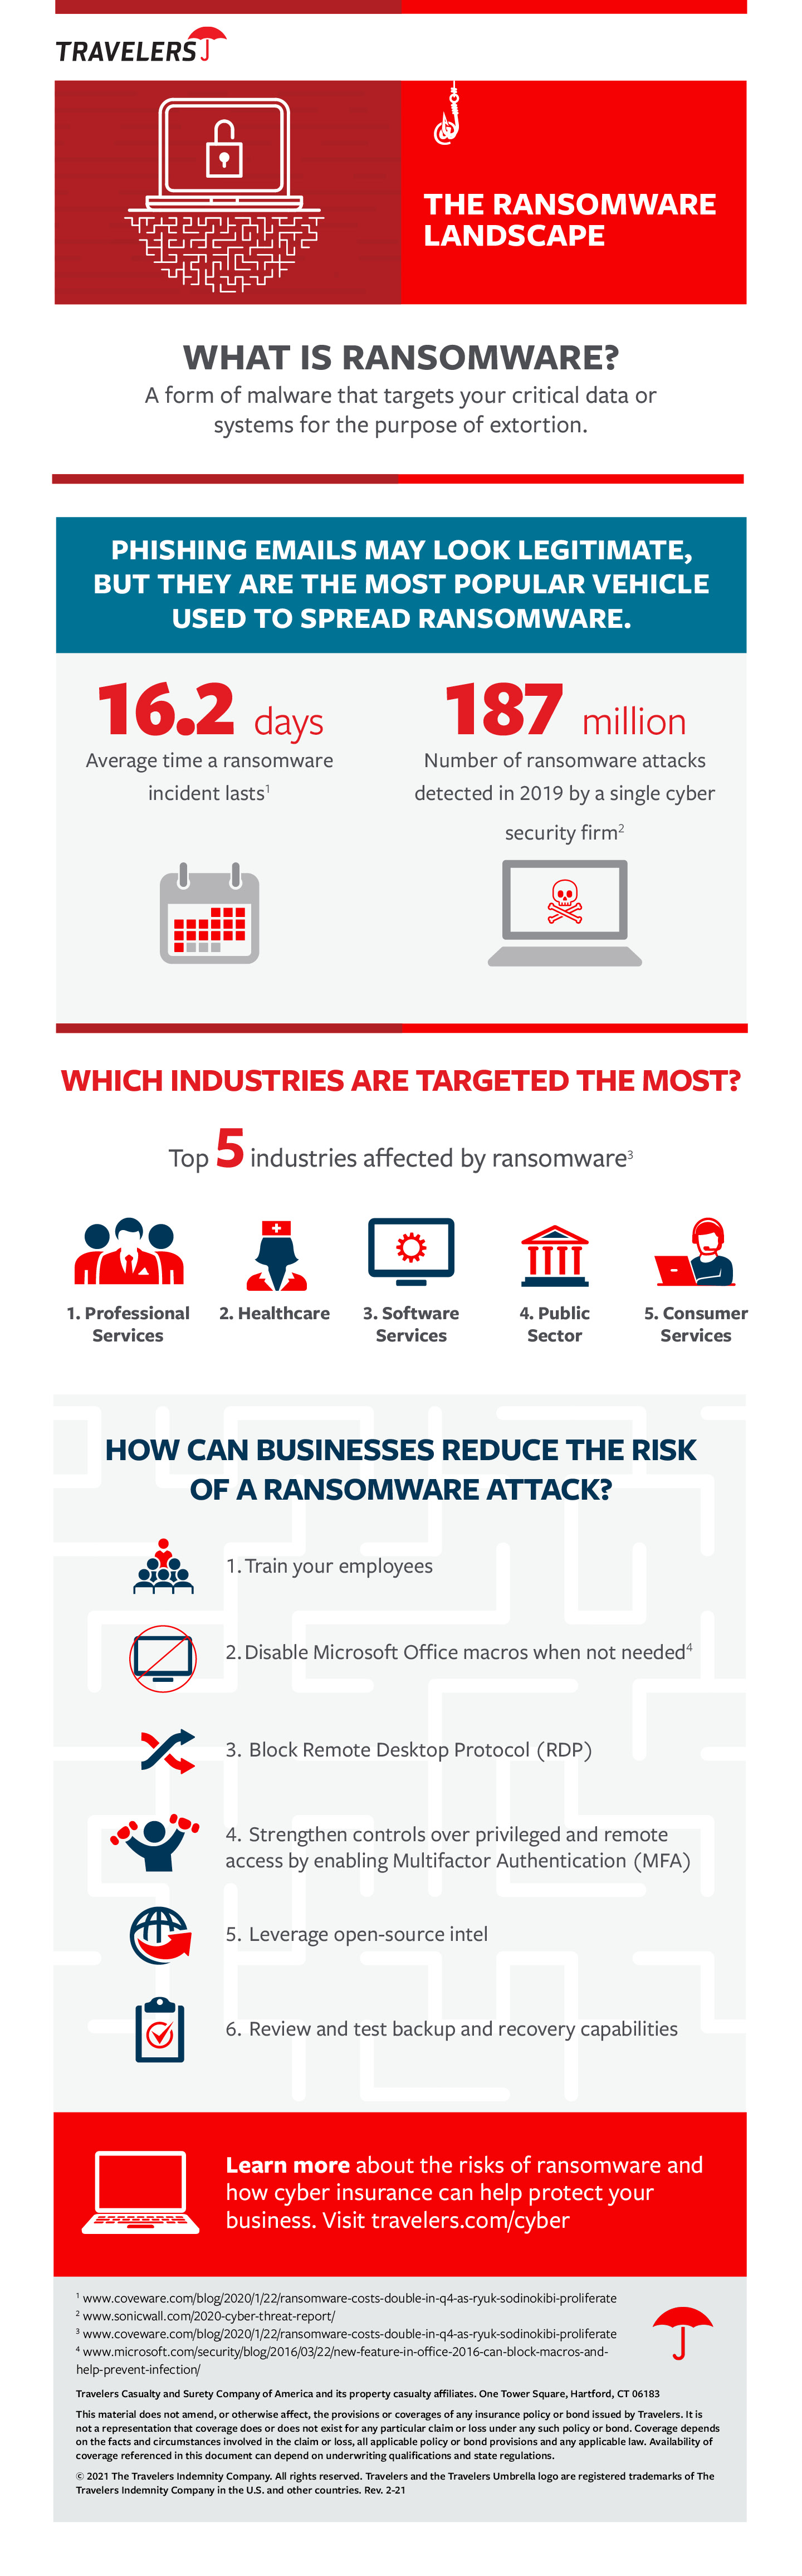 What Is the Current Ransomware Landscape?, see details below